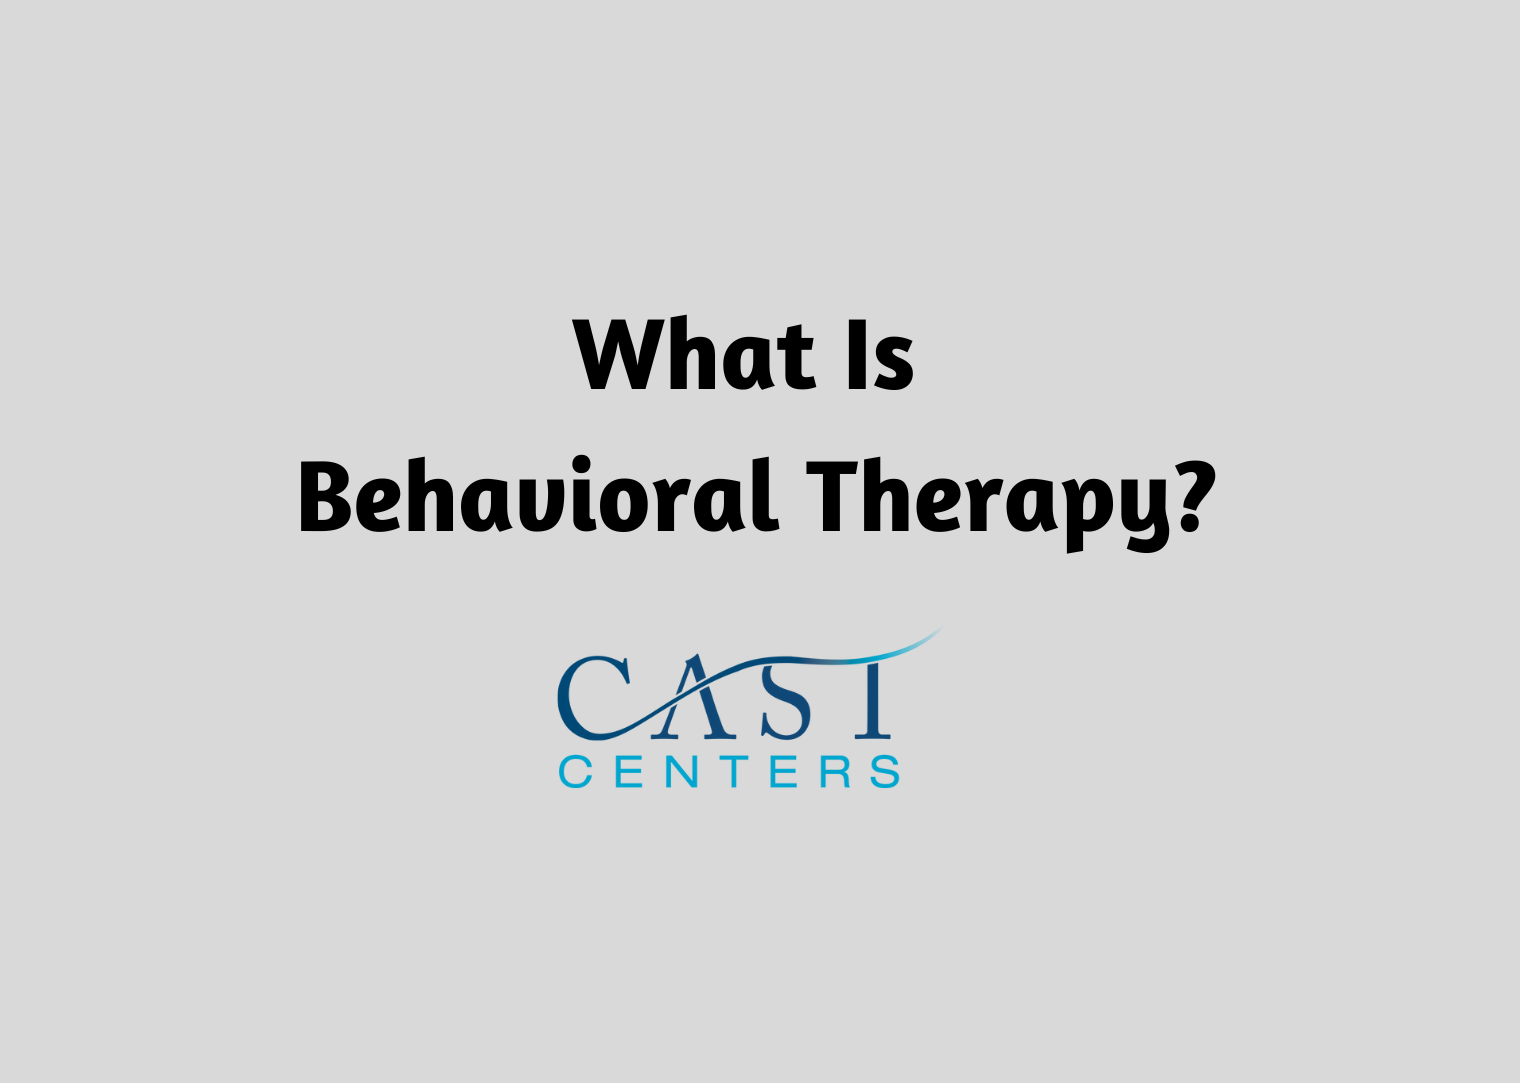 What Is Behavioral Therapy?